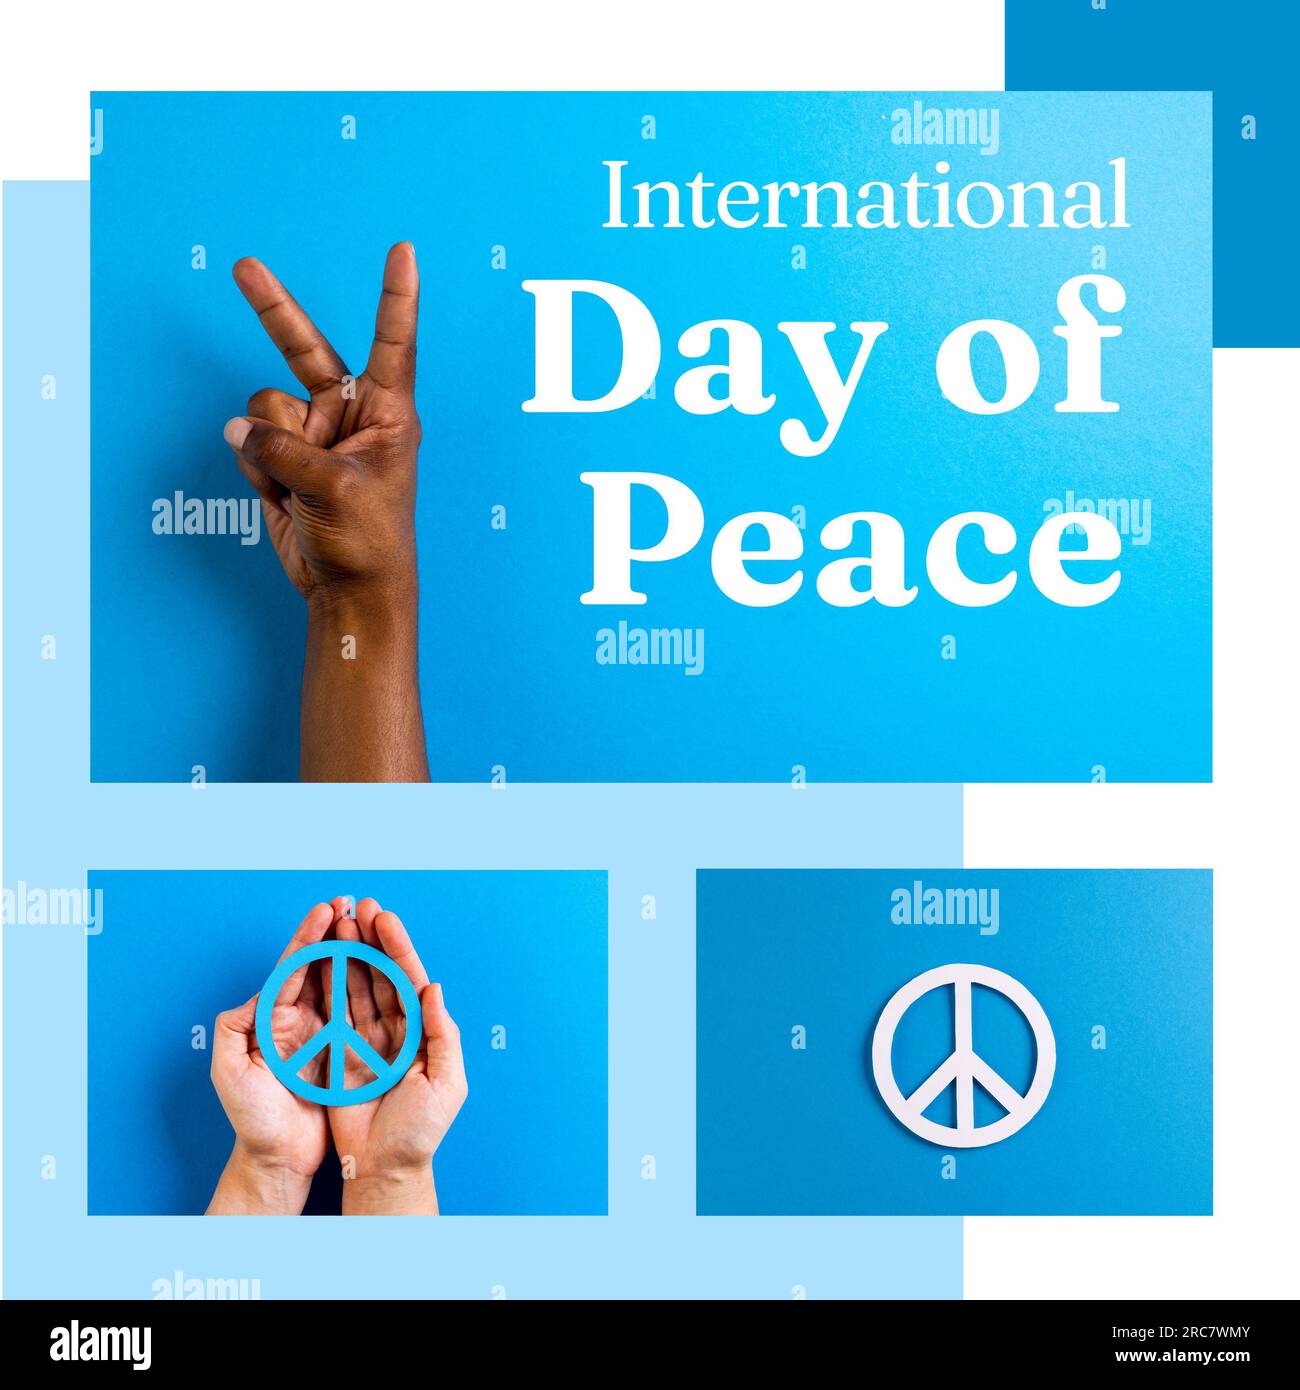 International day of peace text with diverse hands holding peace symbol and making hand sign Stock Photo